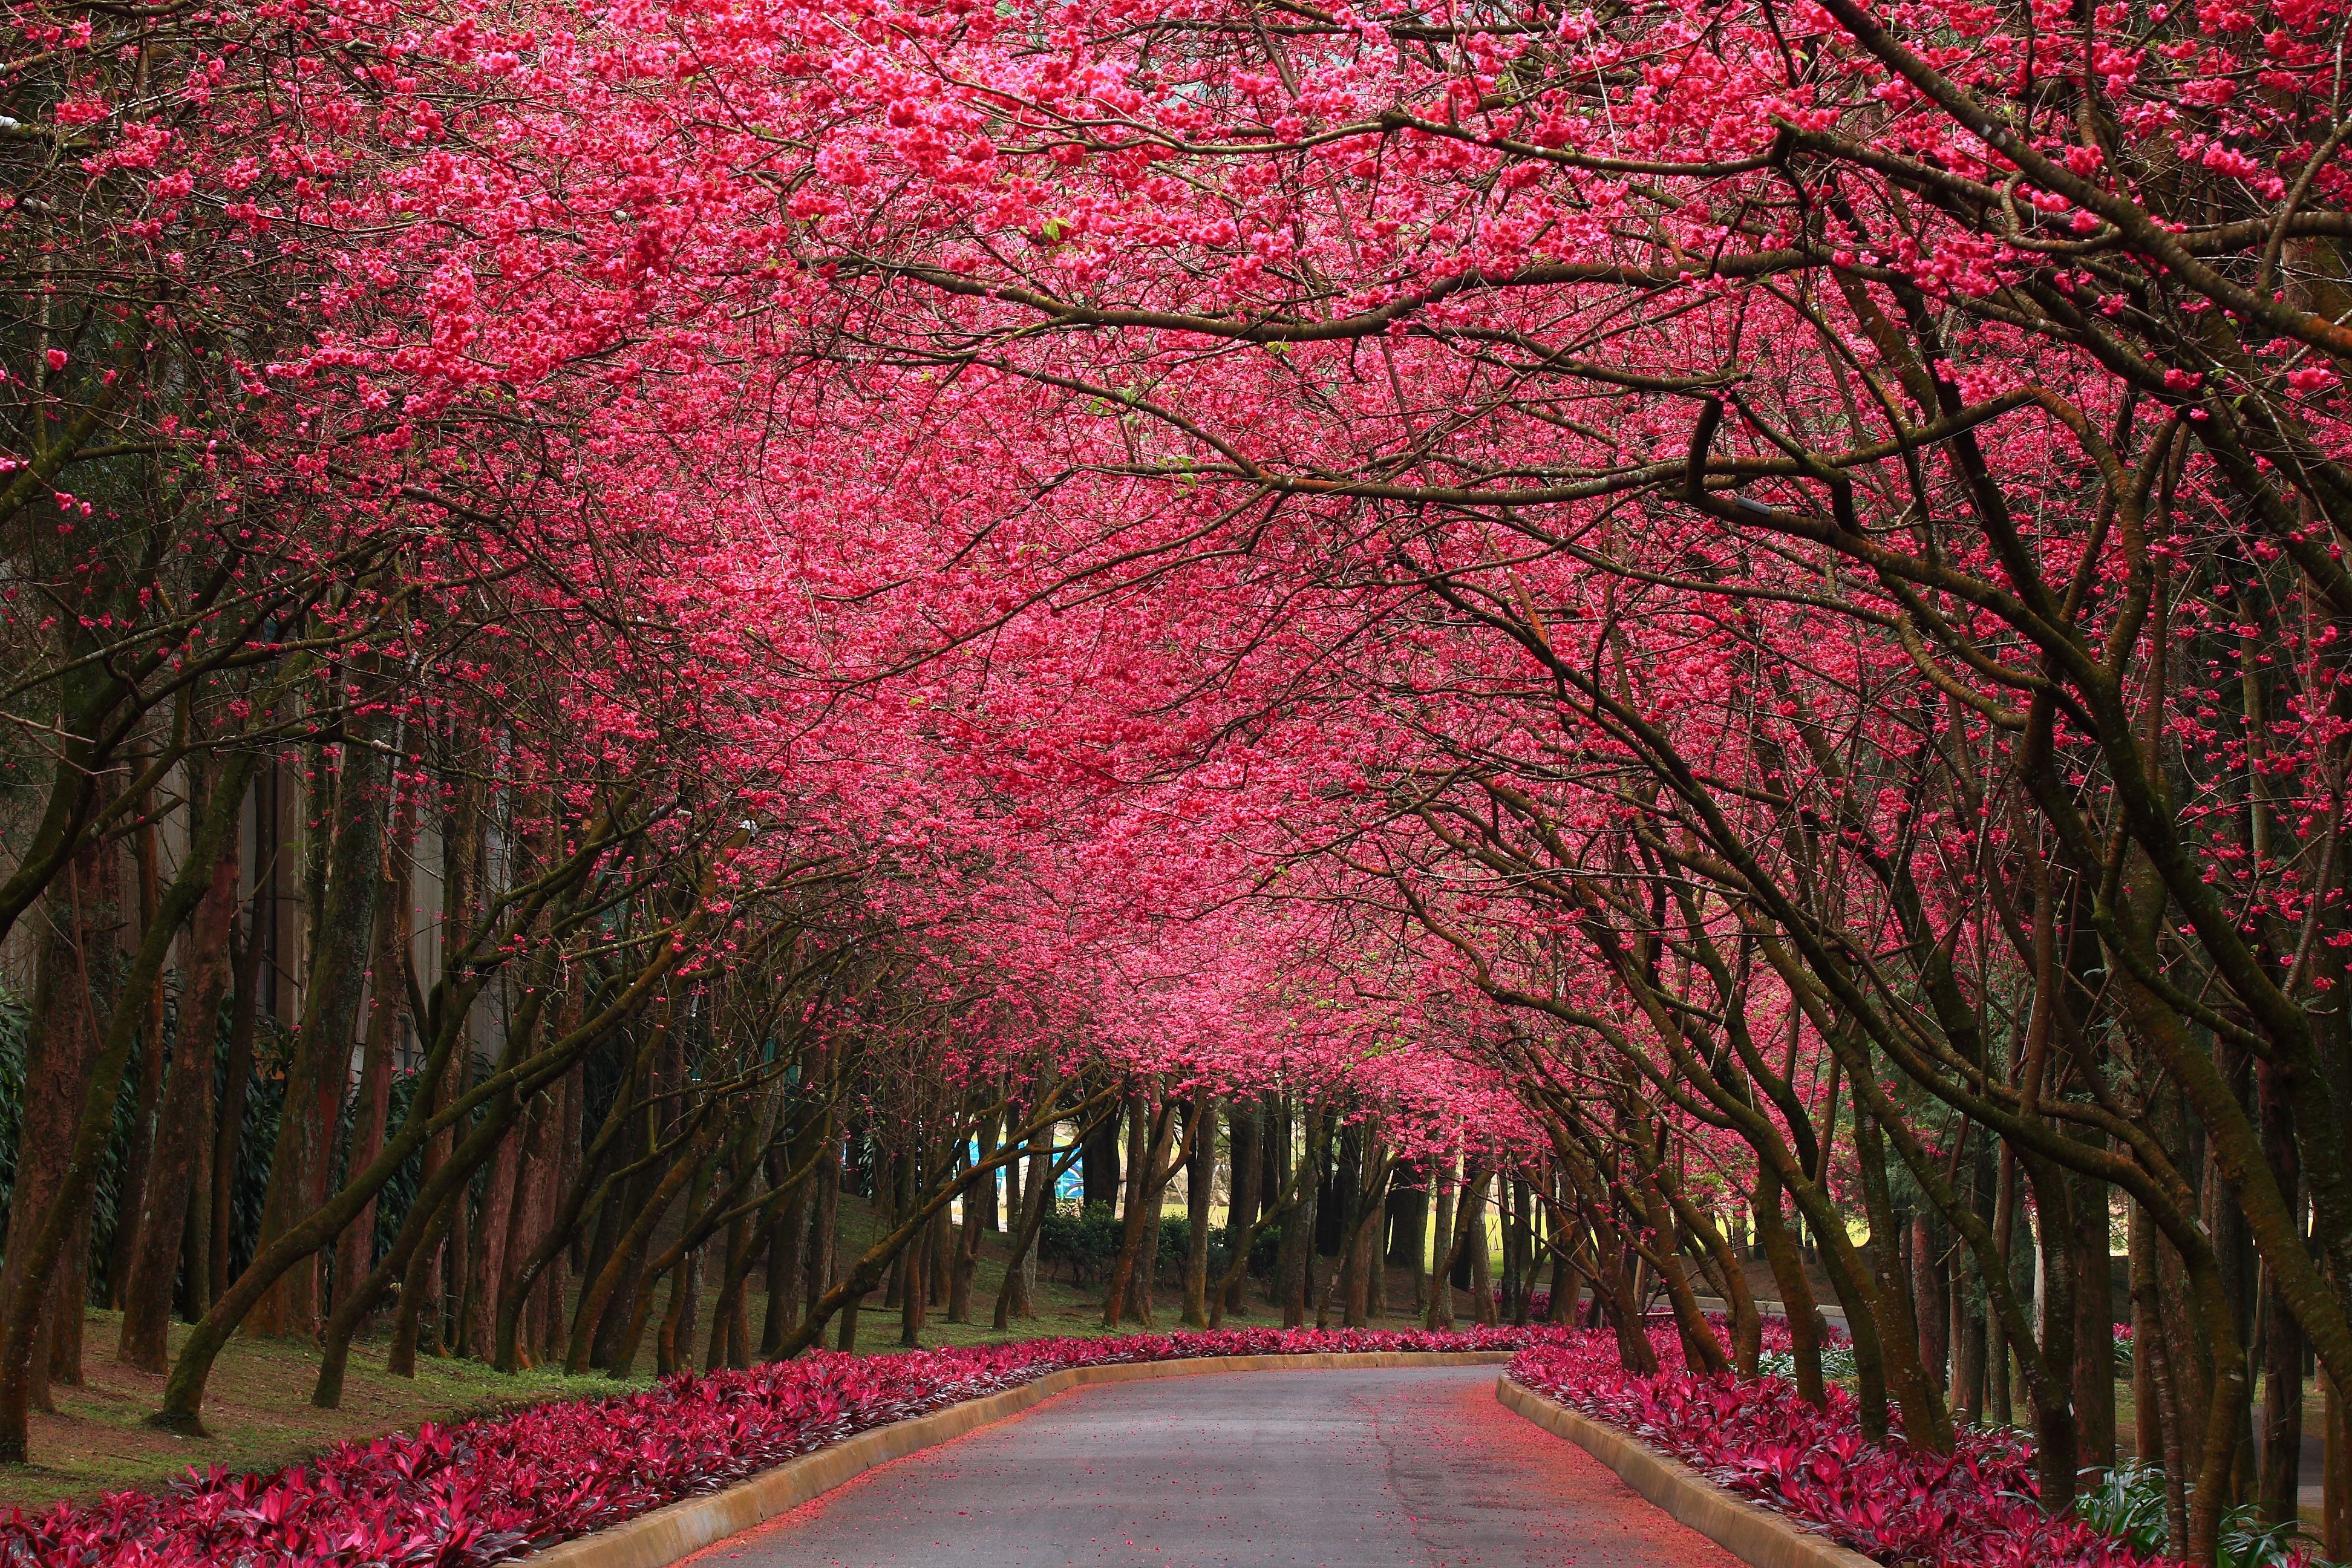 Flower Tree Image Wallpapers